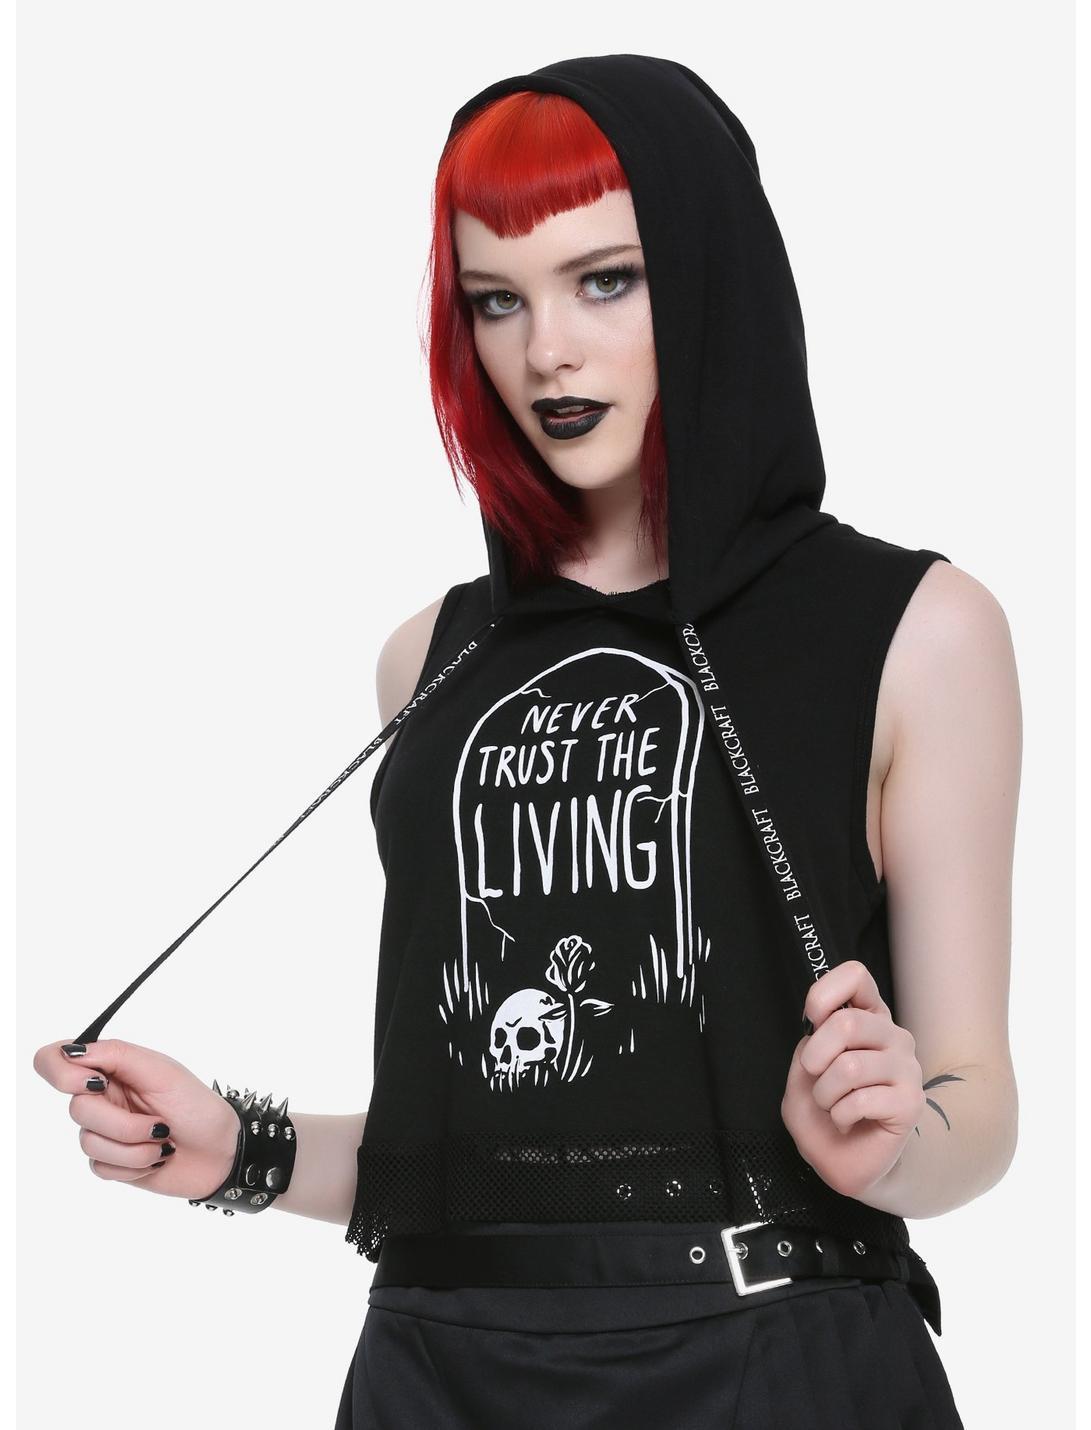 BlackCraft Never Trust The Living Girls Hooded Crop Muscle Top Hot Topic Exclusive, BLACK, hi-res